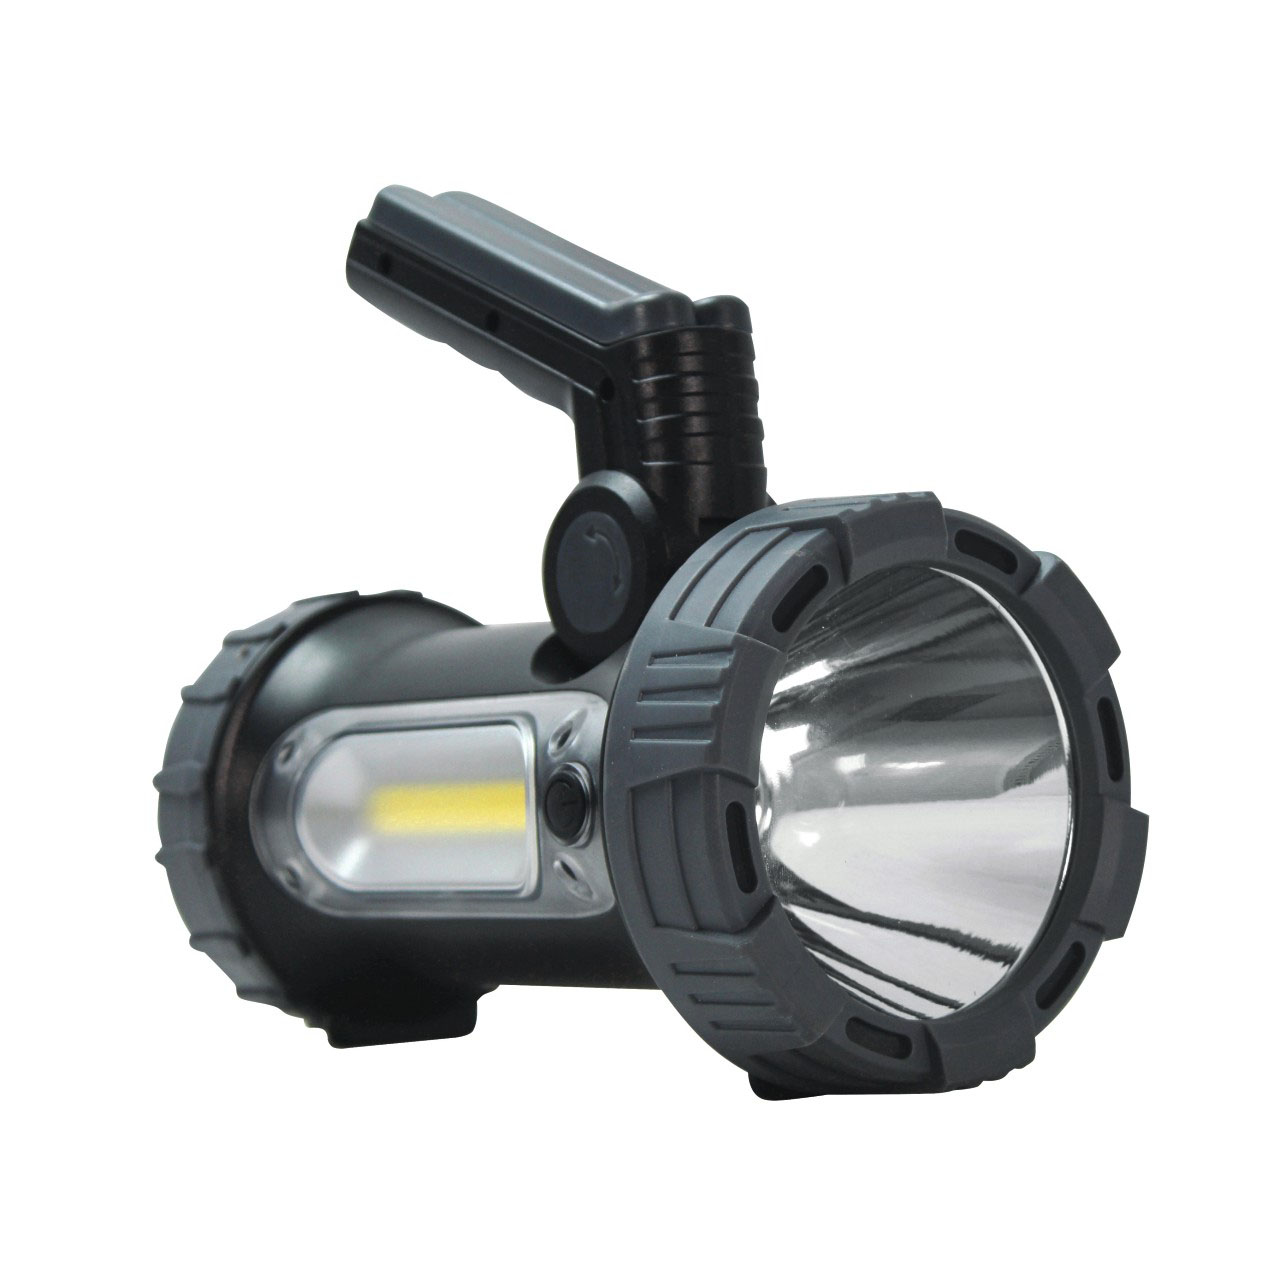 Rechargeable Multi-function Lantern